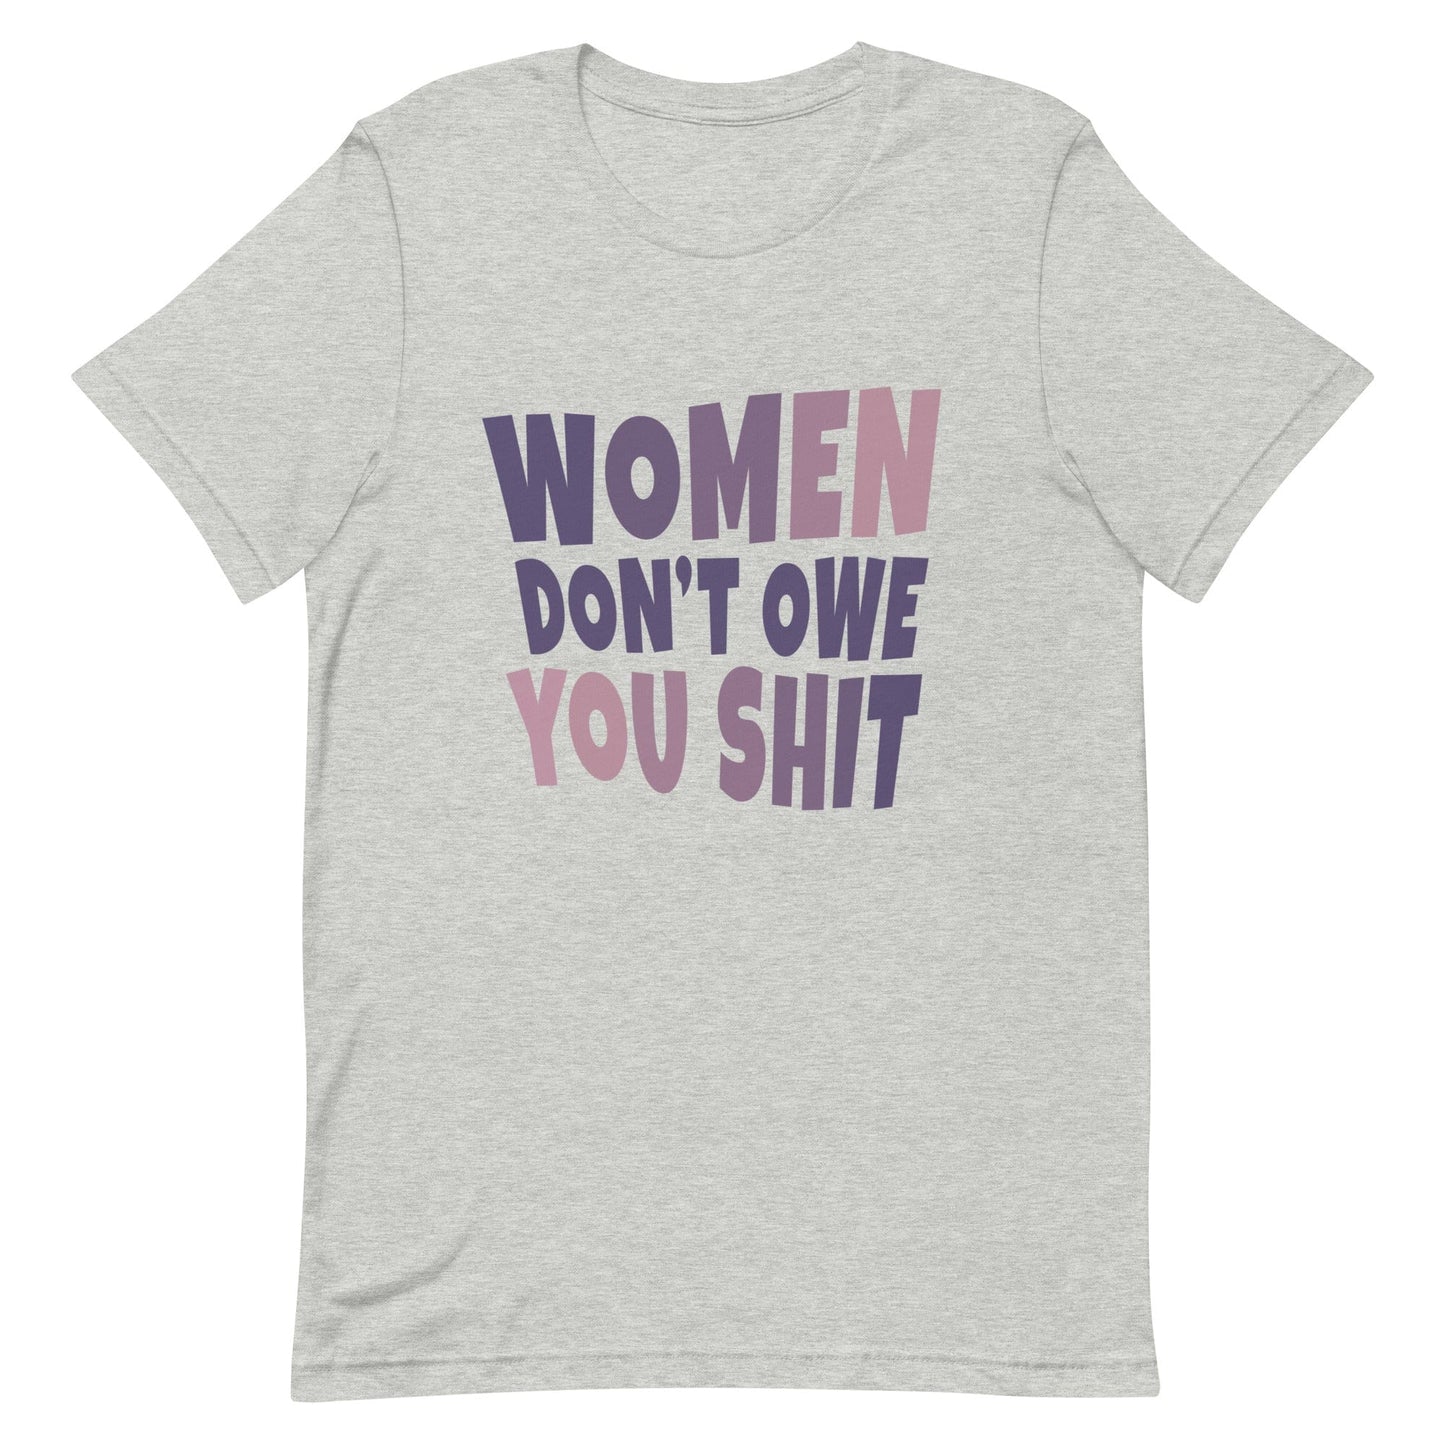 feminist-t-shirt-quote-women-don´t-owe-you-shit-grey-at-feminist-define-front